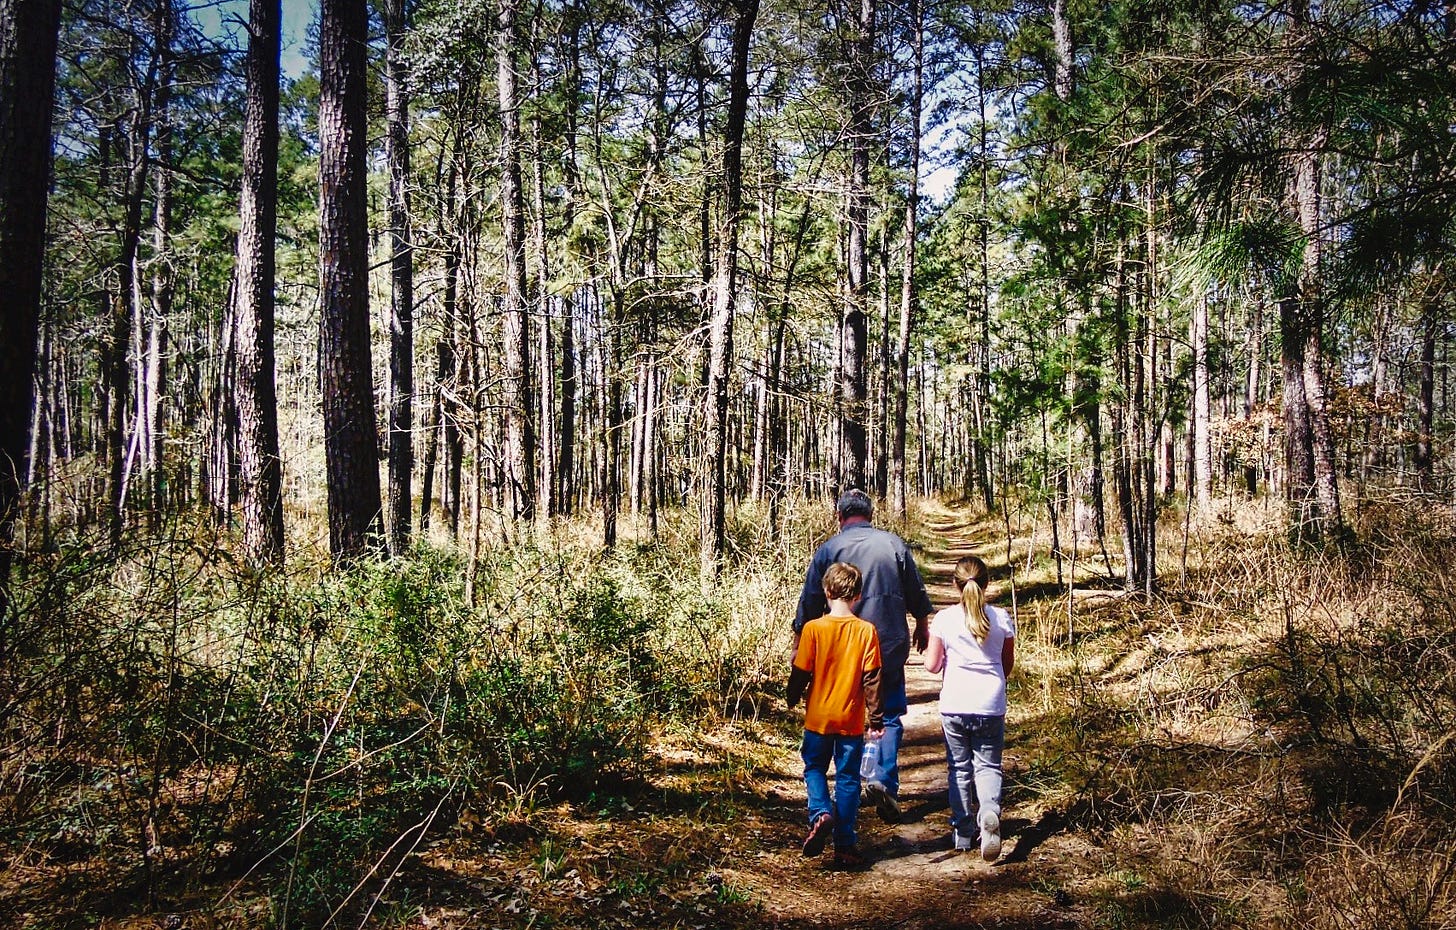 A grandfather with his two grandchildren, a boy and a girl, walking on a path in the forest with dappled lights marking the path